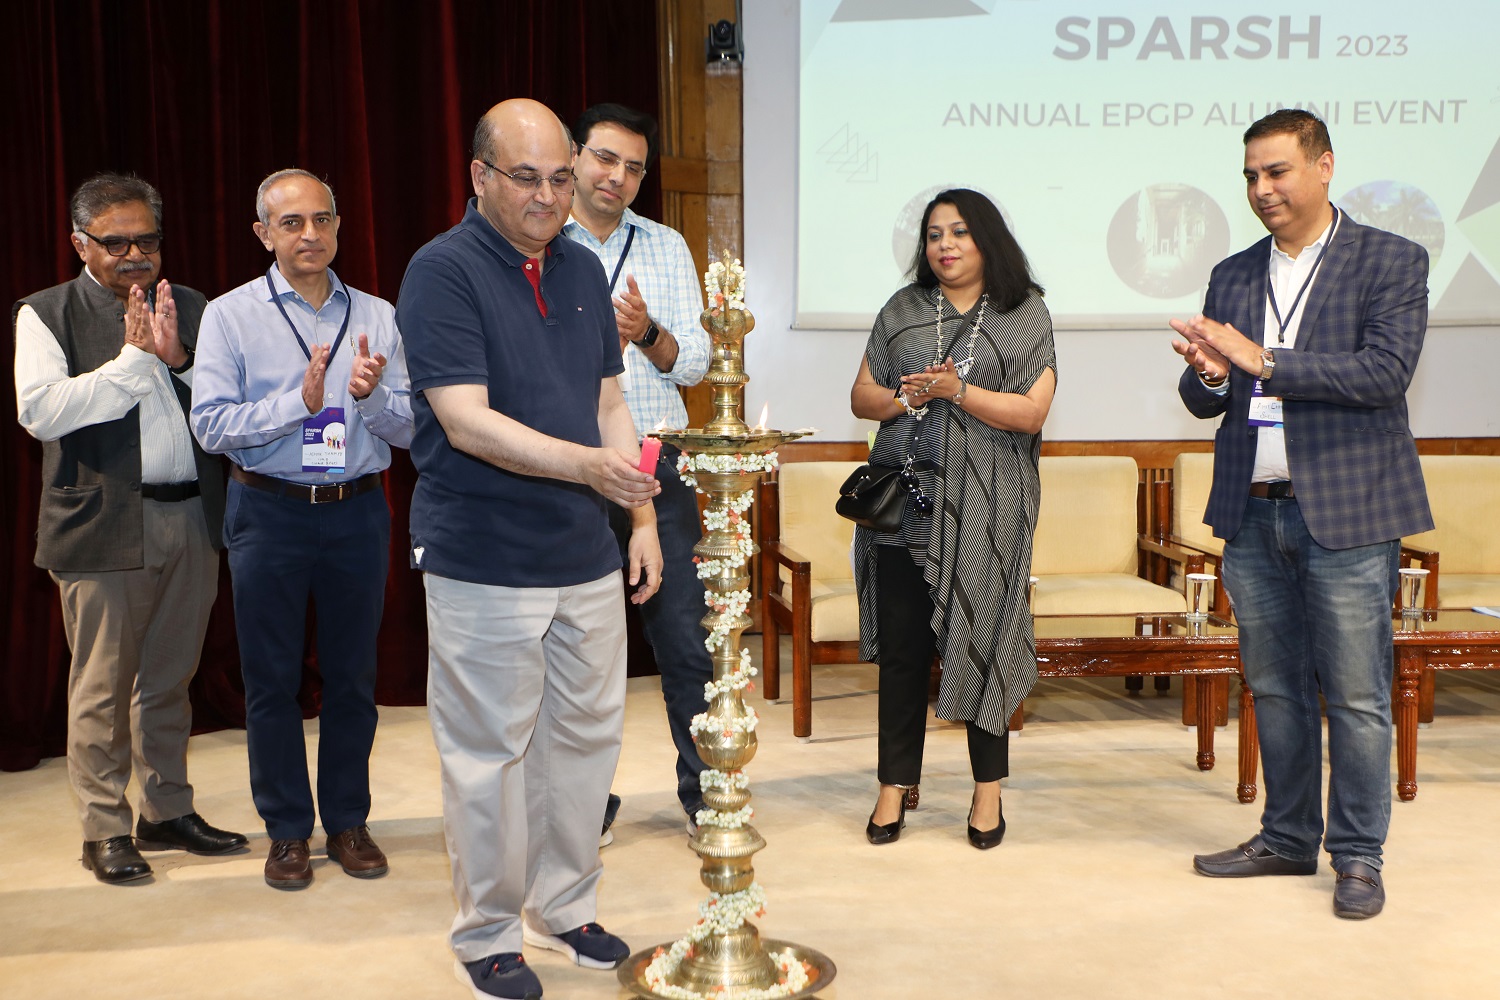 Prof. Rishikesha T Krishnan, Director, IIM Bangalore, inaugurates ‘Sparsh’, the annual EPGP alumni meet hosted by the Executive Post Graduate Programme in Management Office and the EPGP Student Alumni Committee, on 18th February 2023. Prof. Ashok Thampy, Chairperson, EPGP, and Prof. Abhoy K Ojha of the Organizational Behavior & Human Resources Management area, can also be seen.